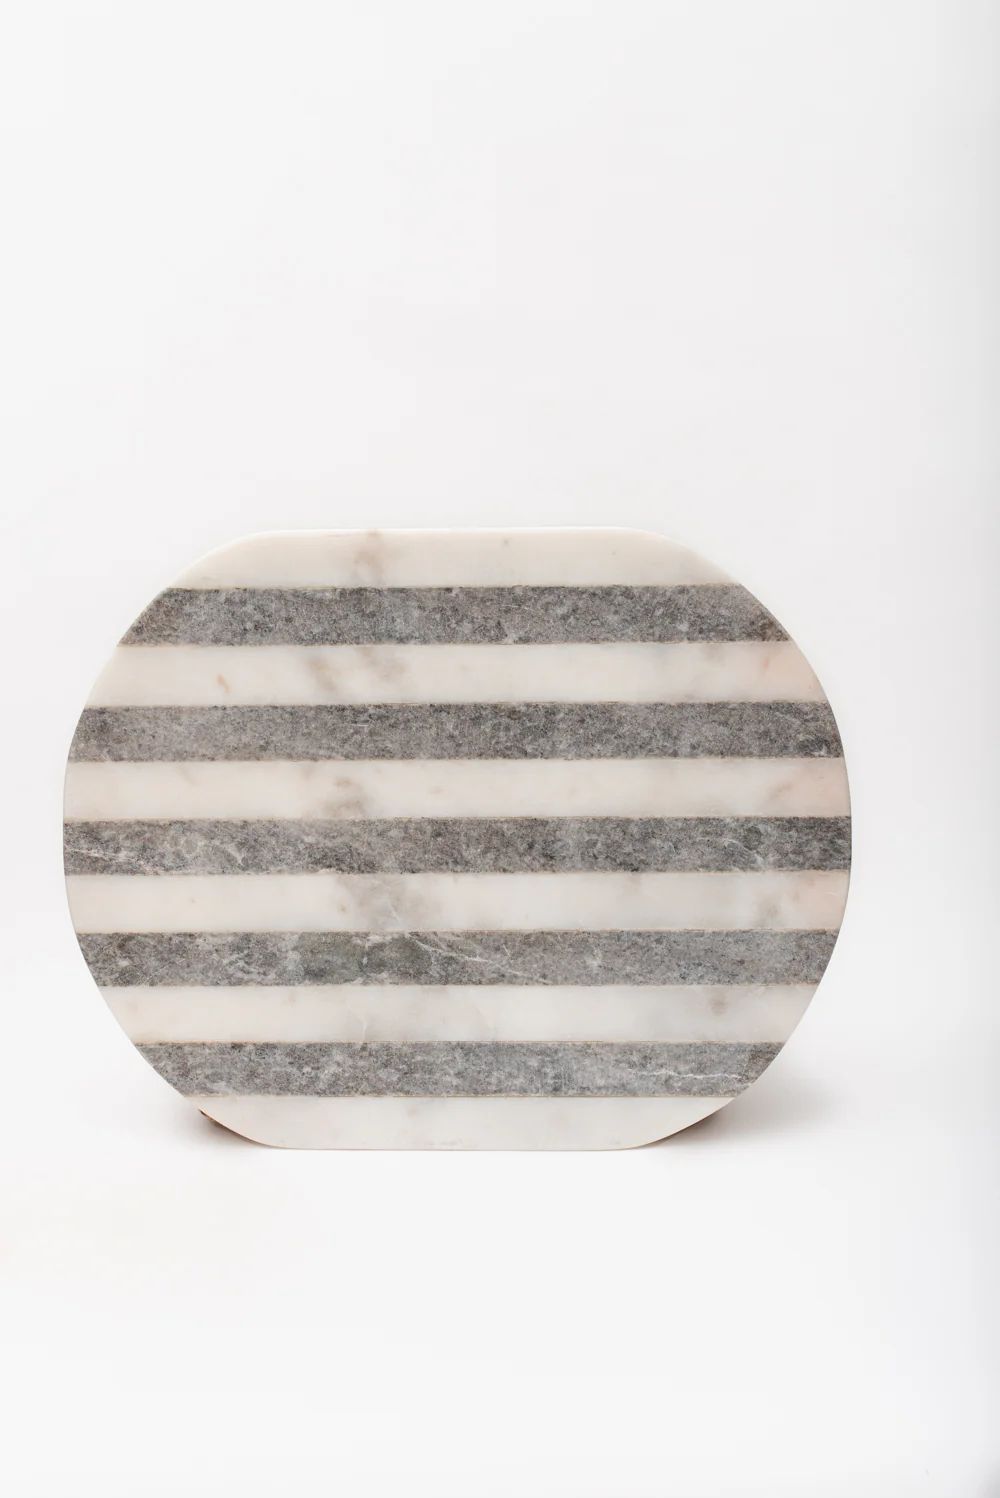 Marble Cheese/Cutting Board | Joy Meets Home